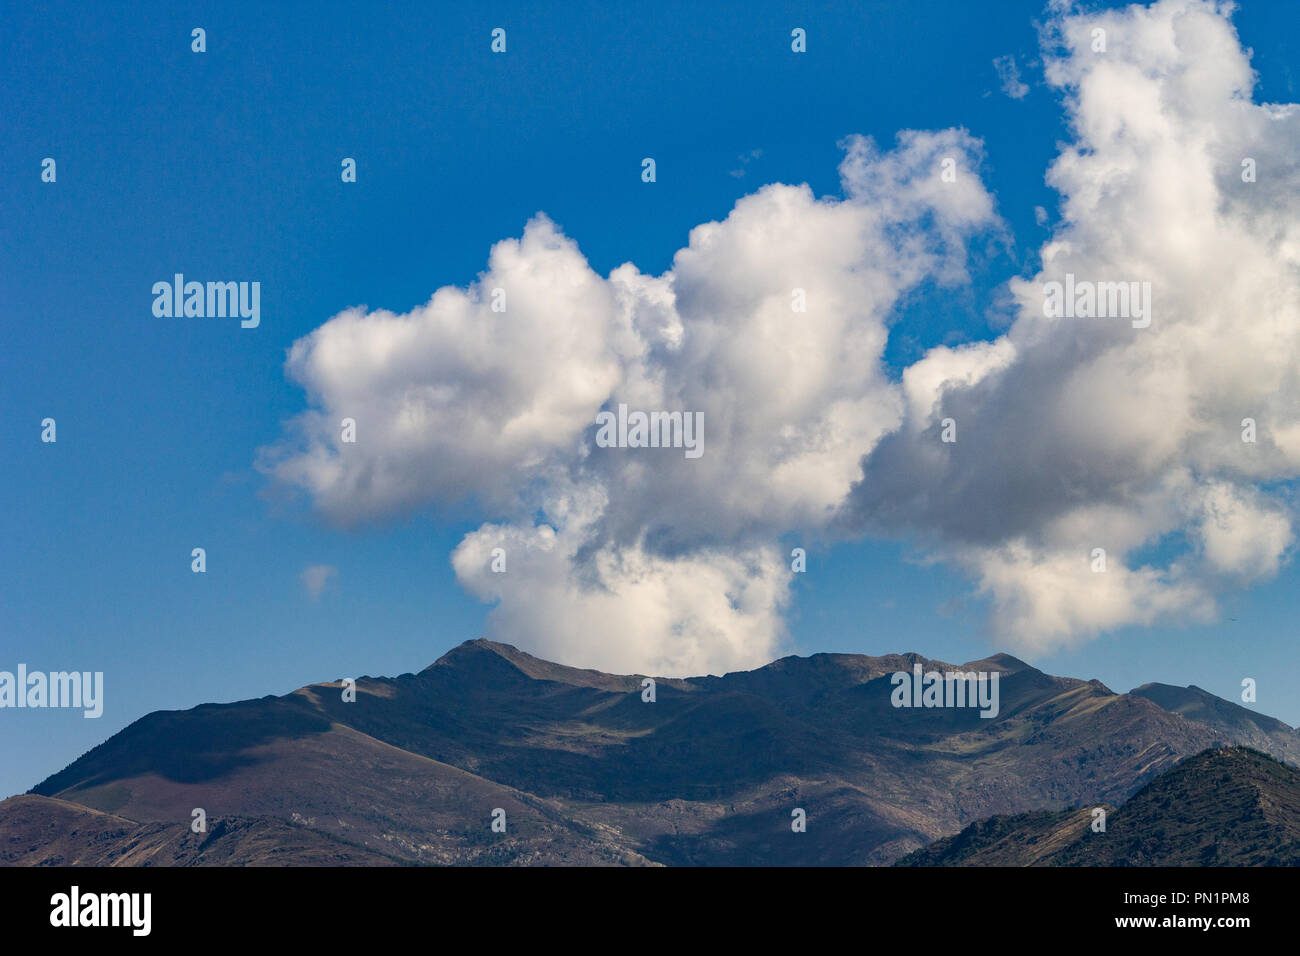 A smoke shaped cloud formation resembling a chimney comes from behind the mountains. Stock Photo